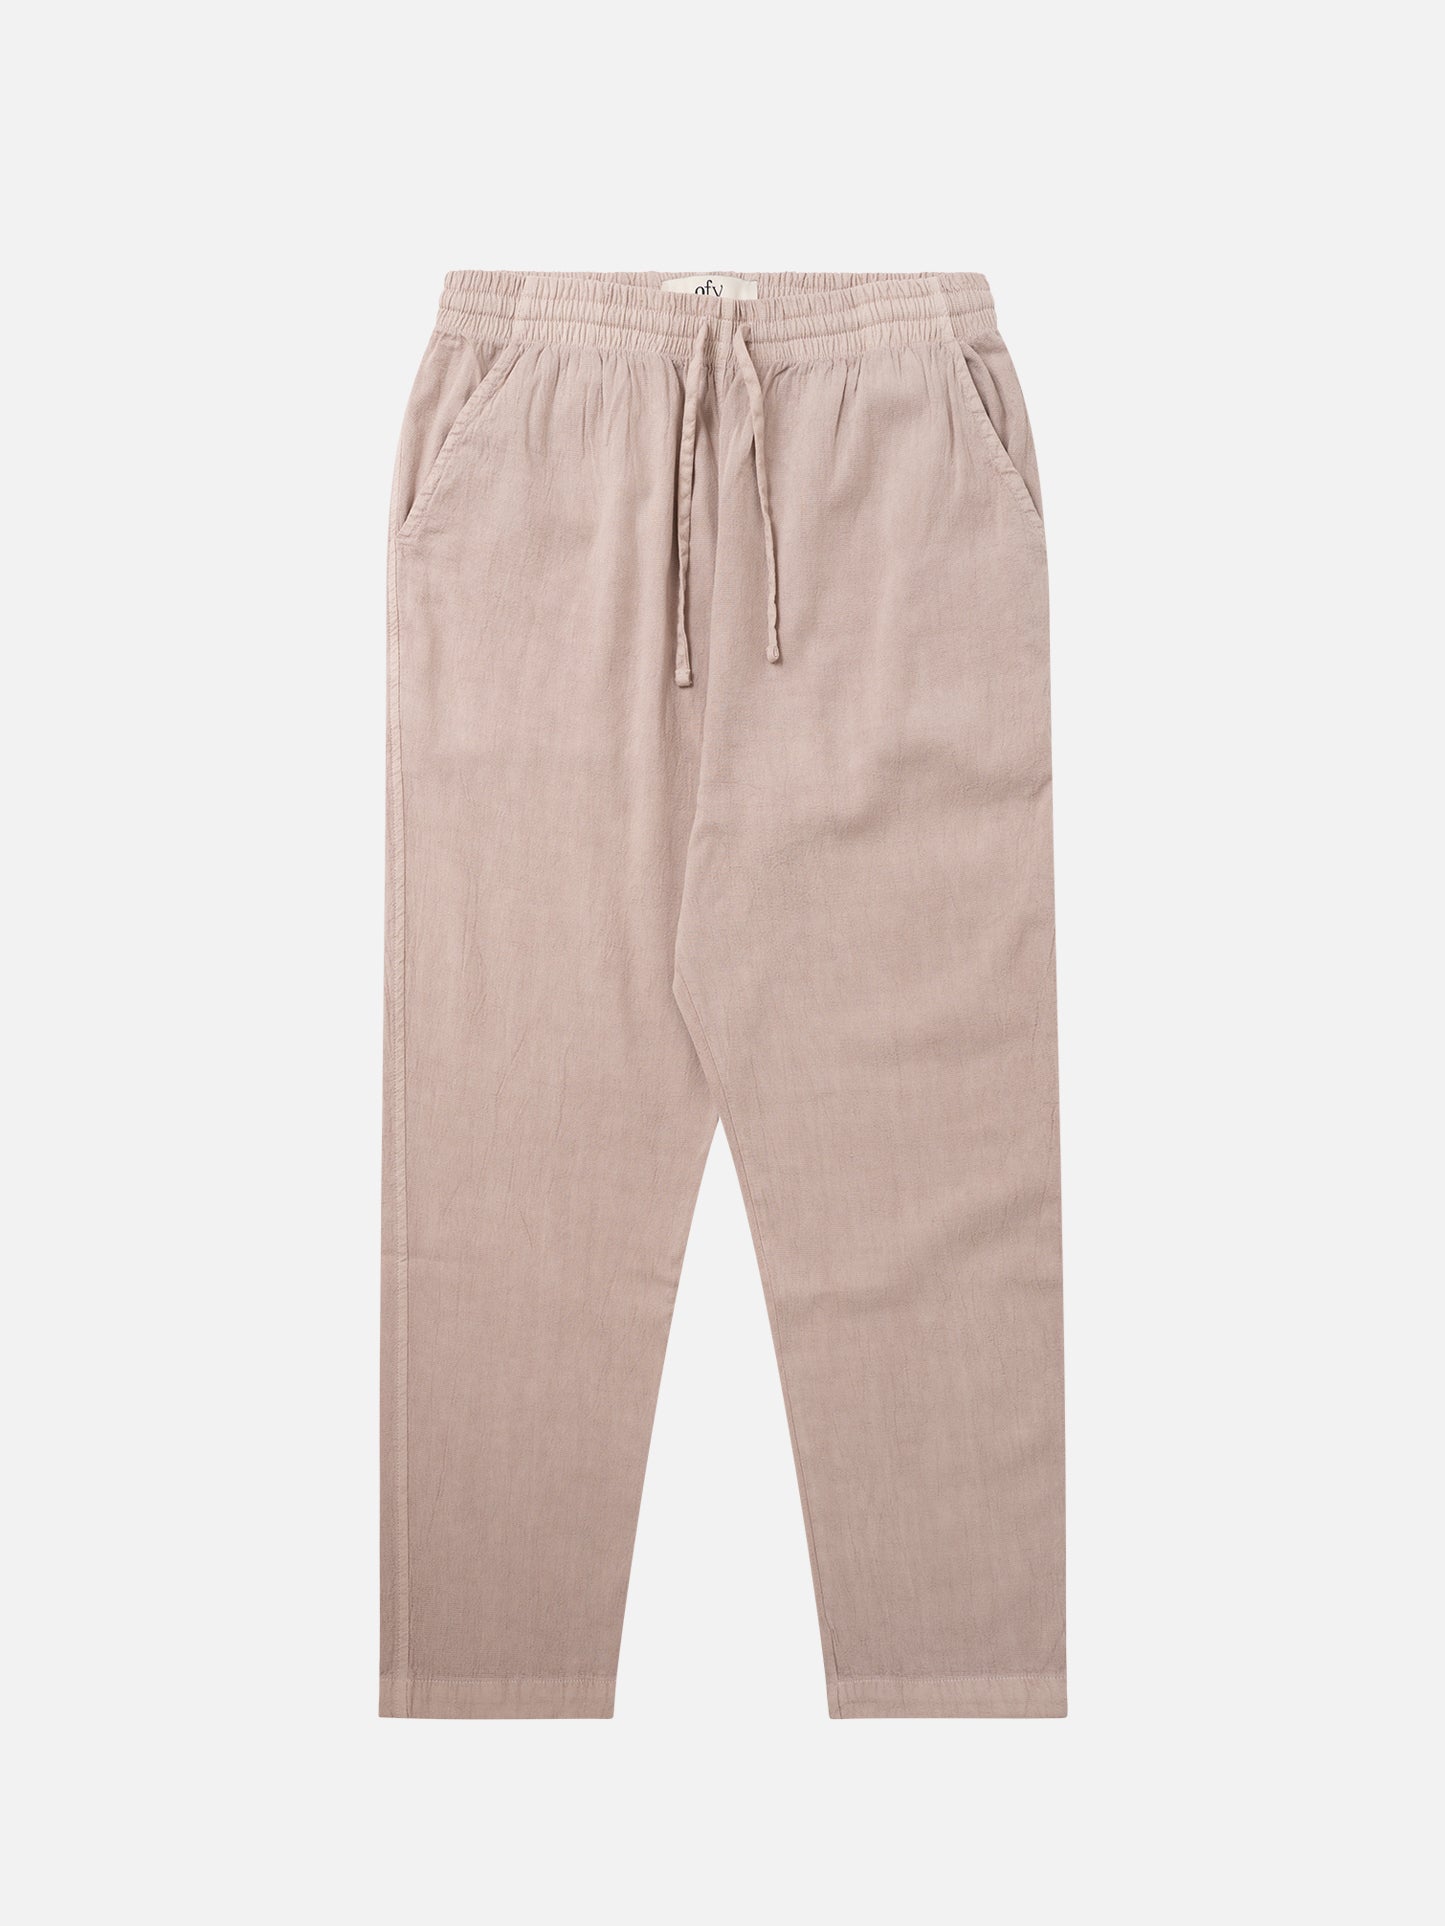 Horizon Crinkle Pant - Perfectly Pale